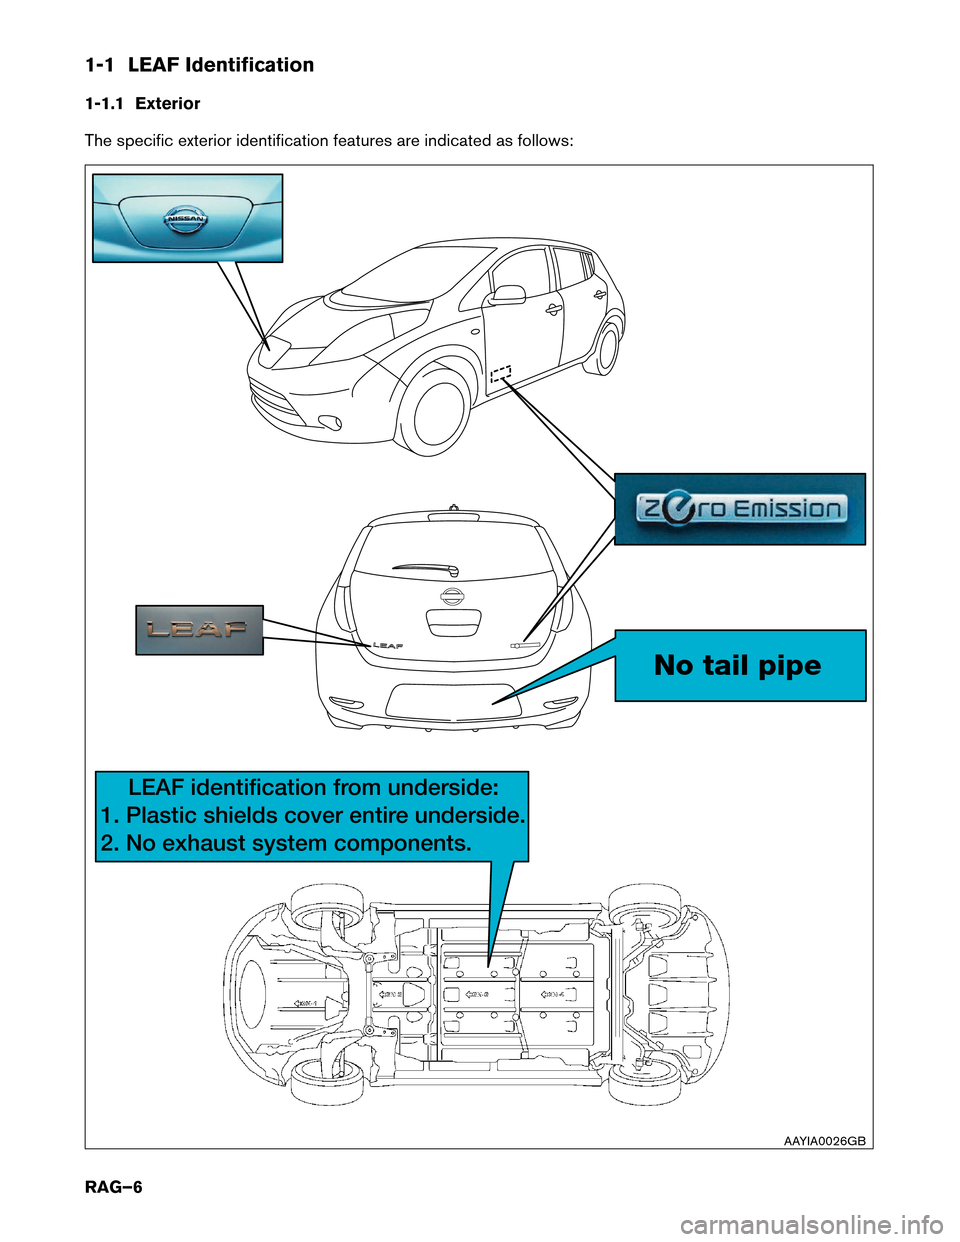 NISSAN LEAF 2014 1.G Roadside Assistance Guide 1-1 LEAF Identification
1-1.1
Exterior
The specific exterior identification features are indicated as follows: No tail pipe
LEAF identification from underside:
1. Plastic shields cover entir
 e under